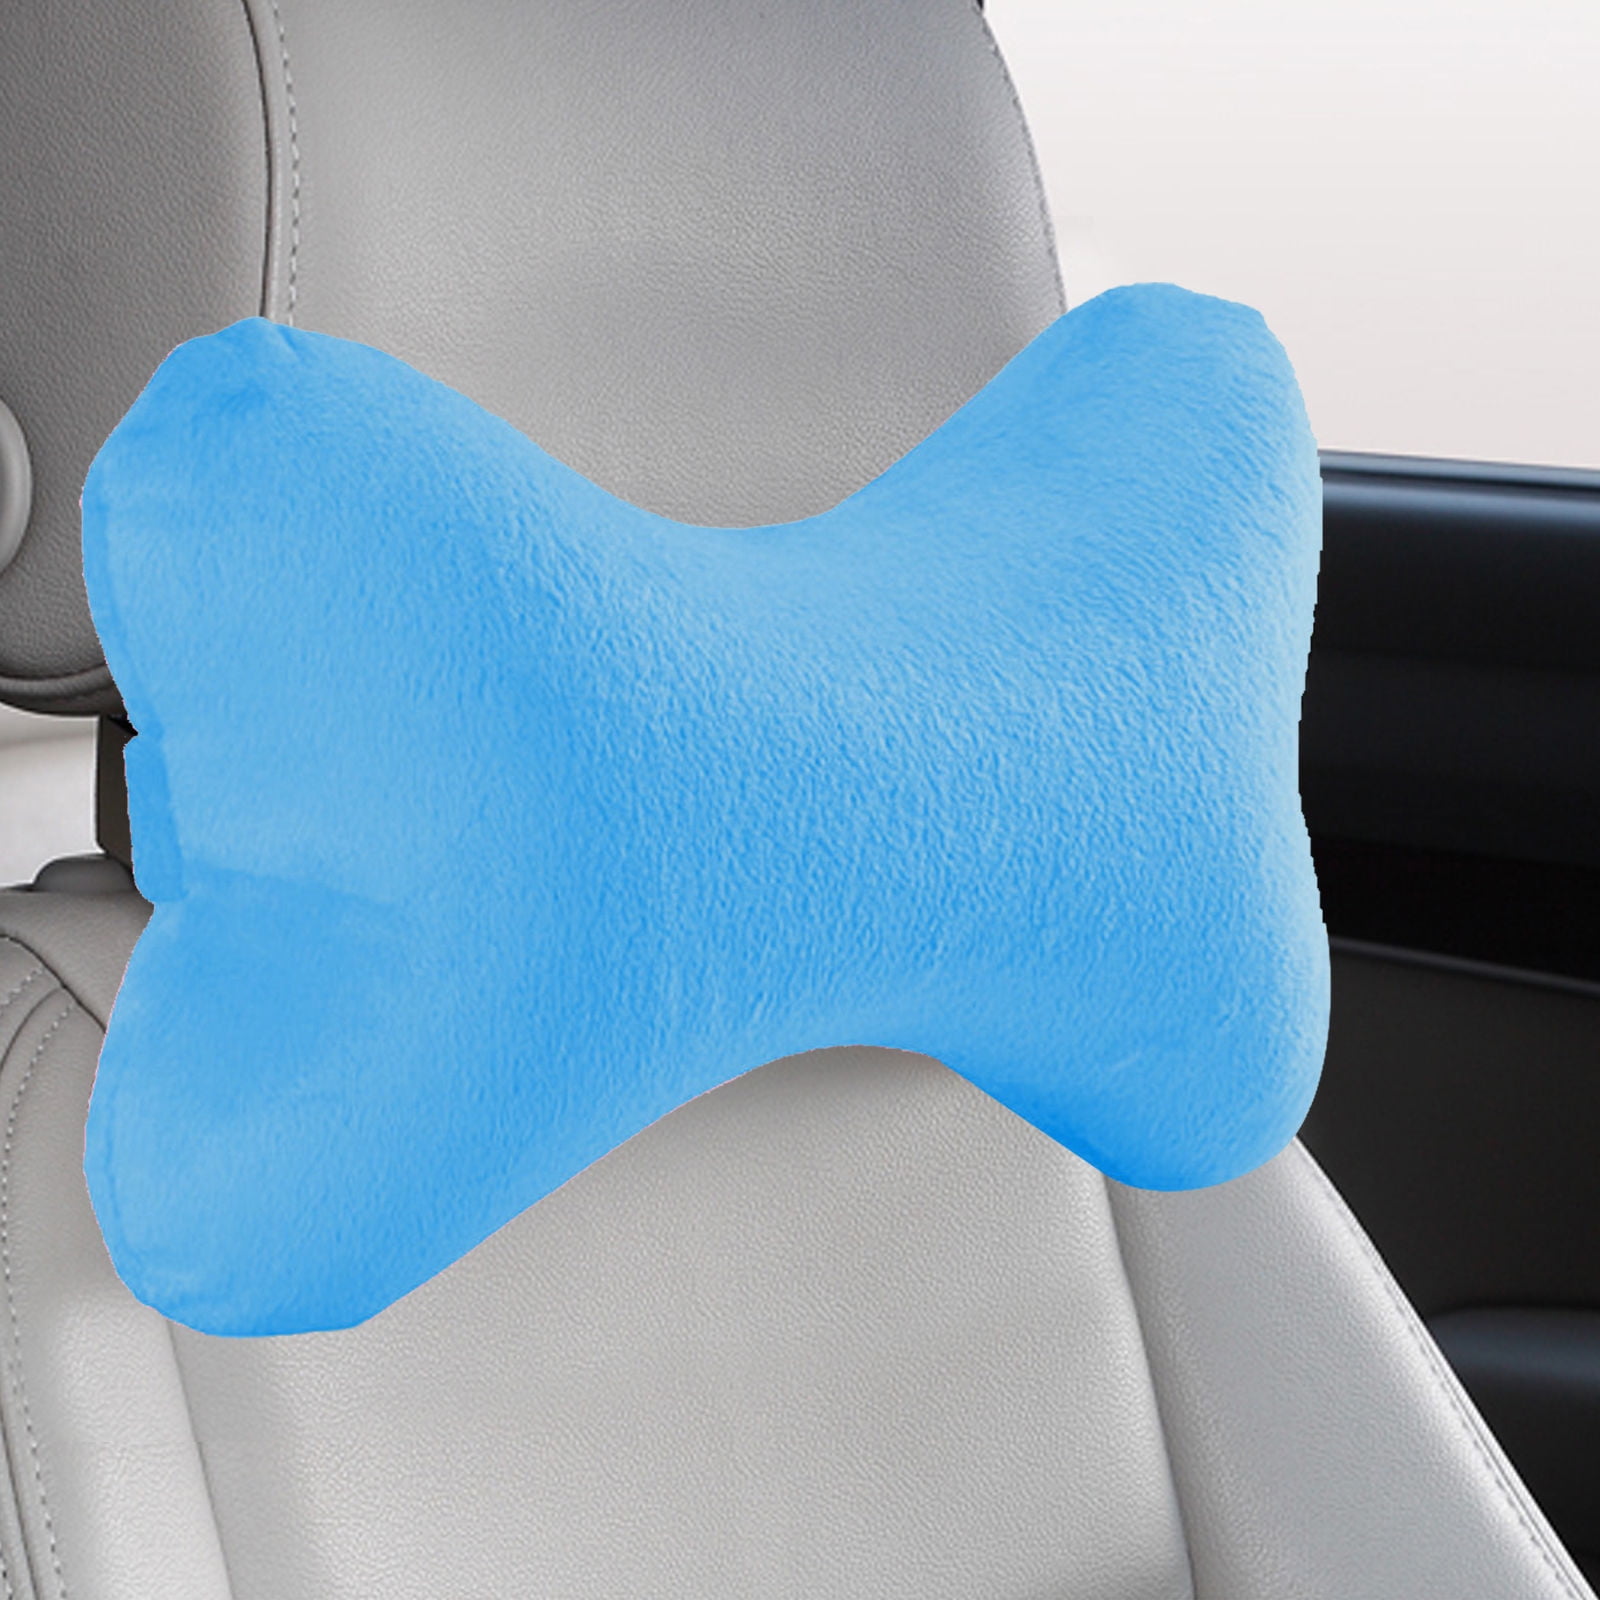 Best Neck Support Pillow for Car Seat - CarCan